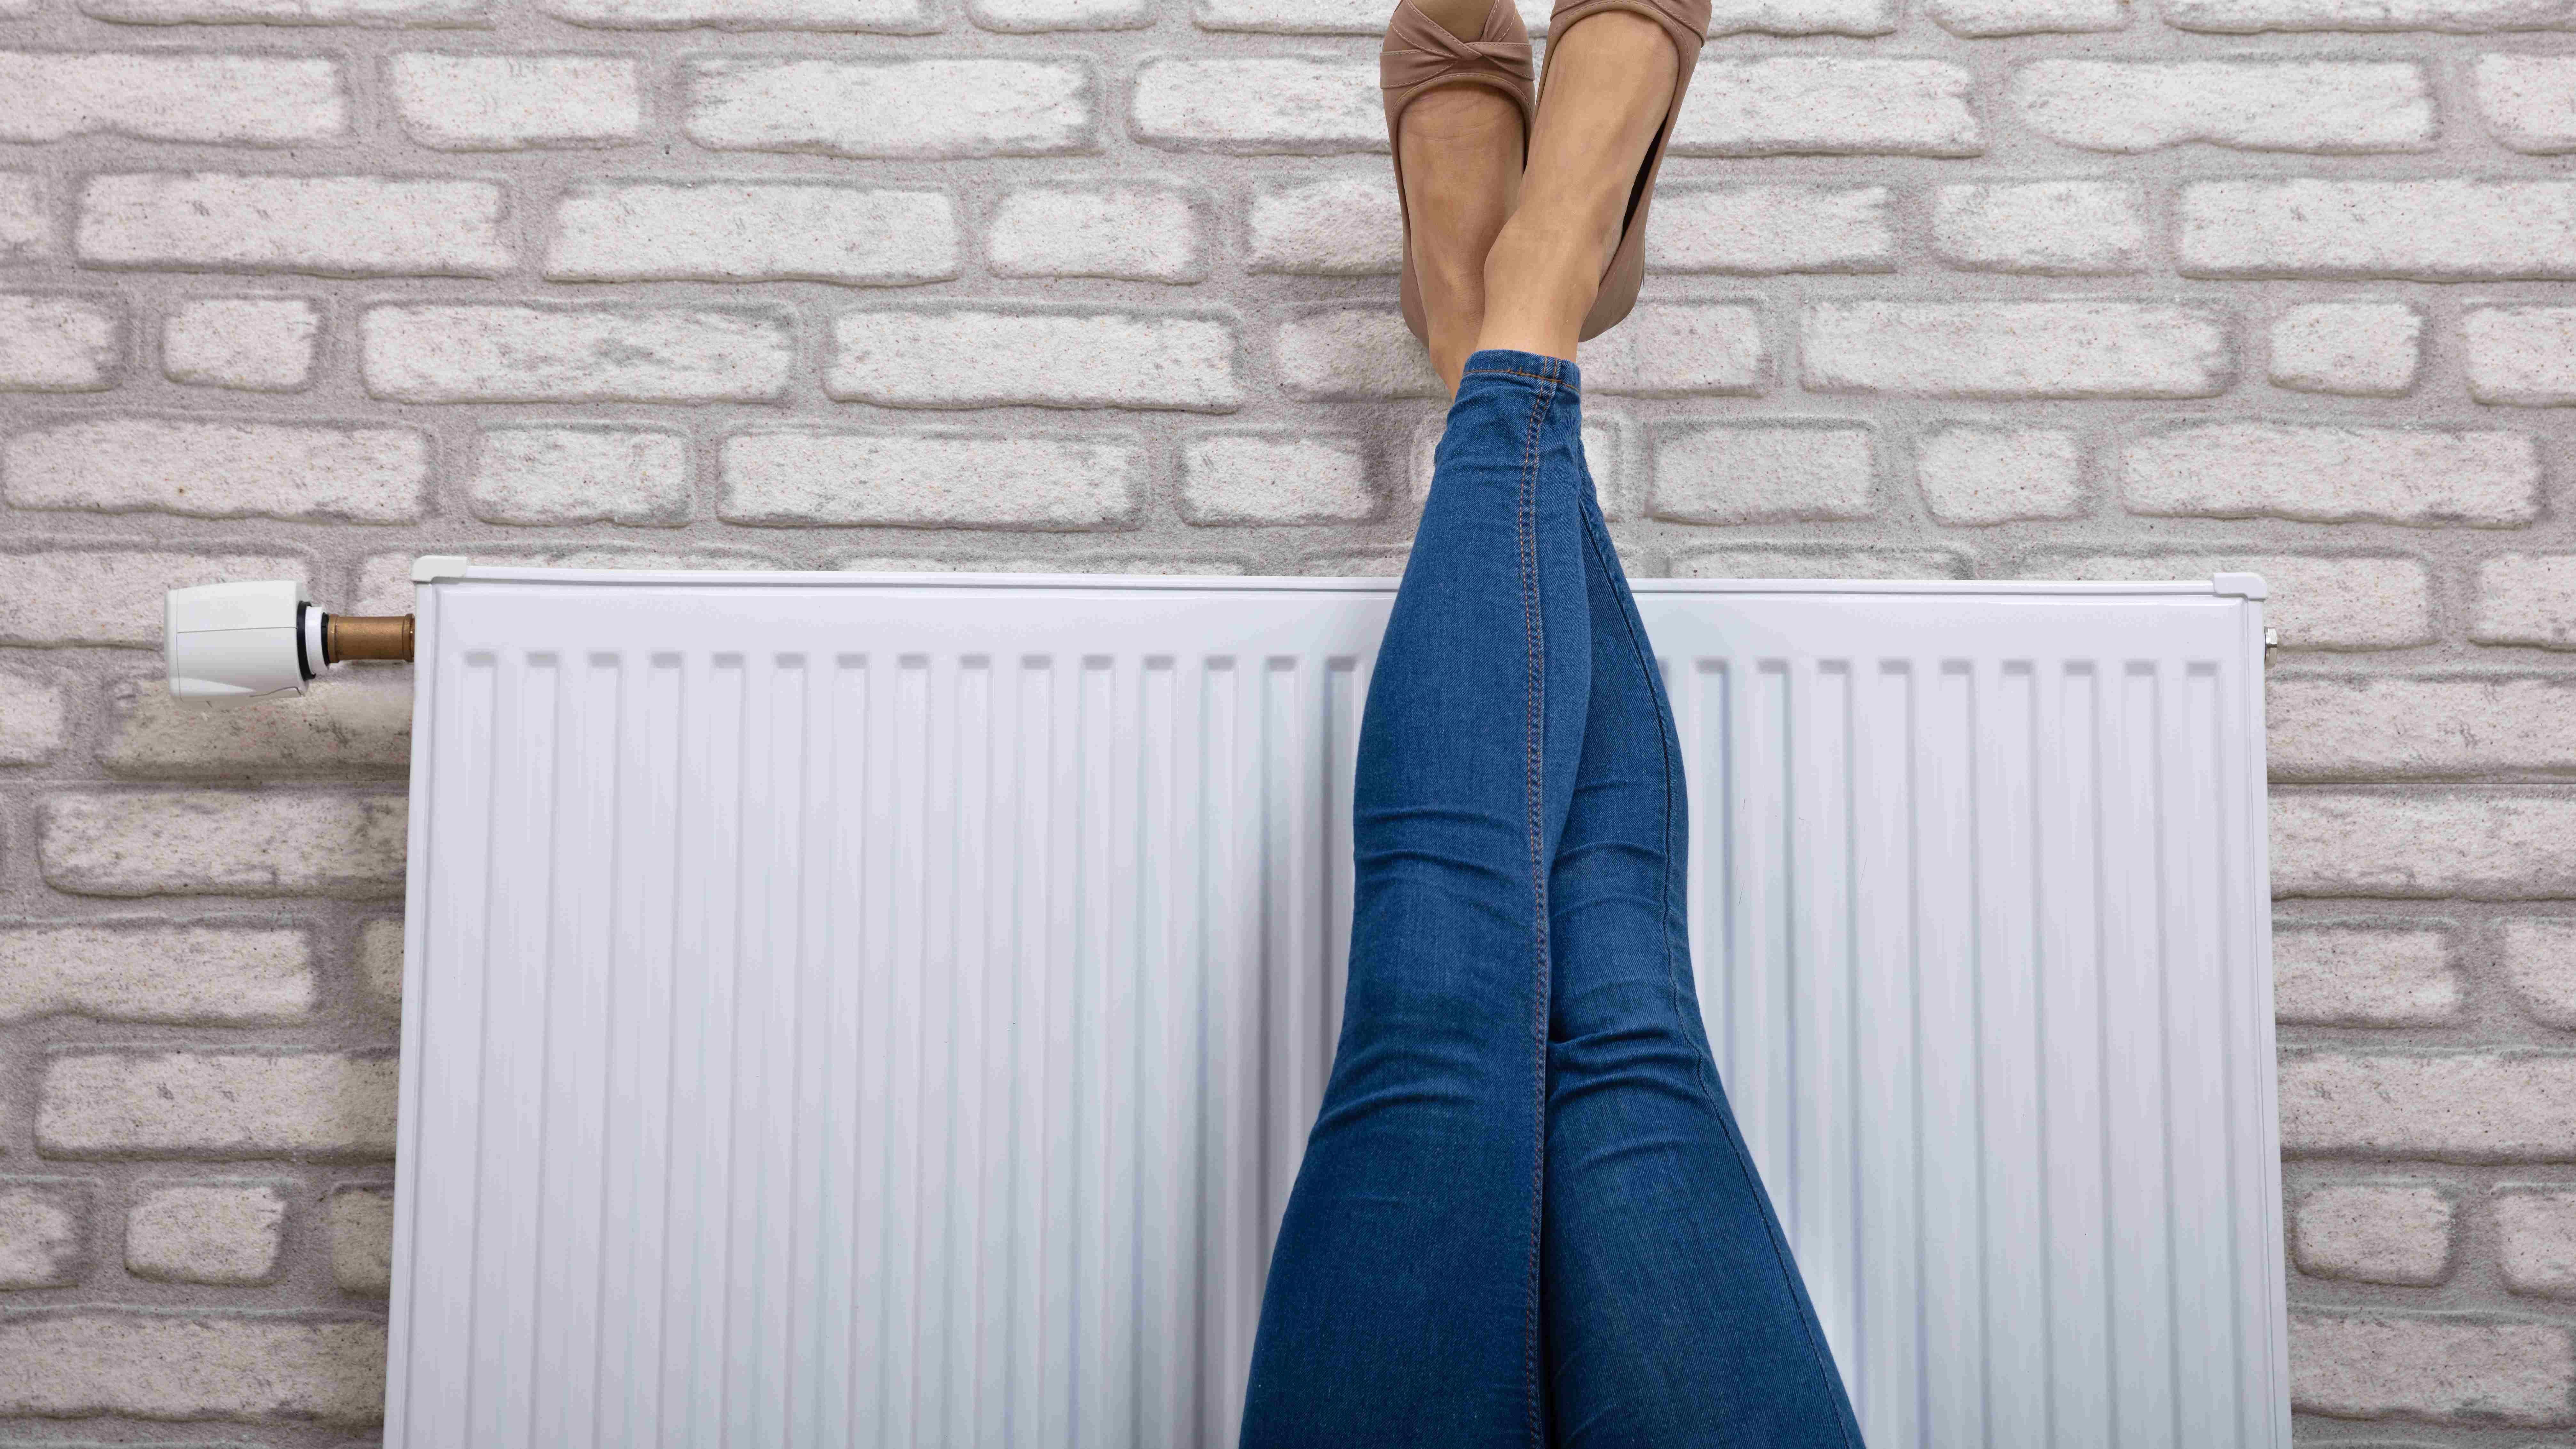 Central heating radiator buying guide